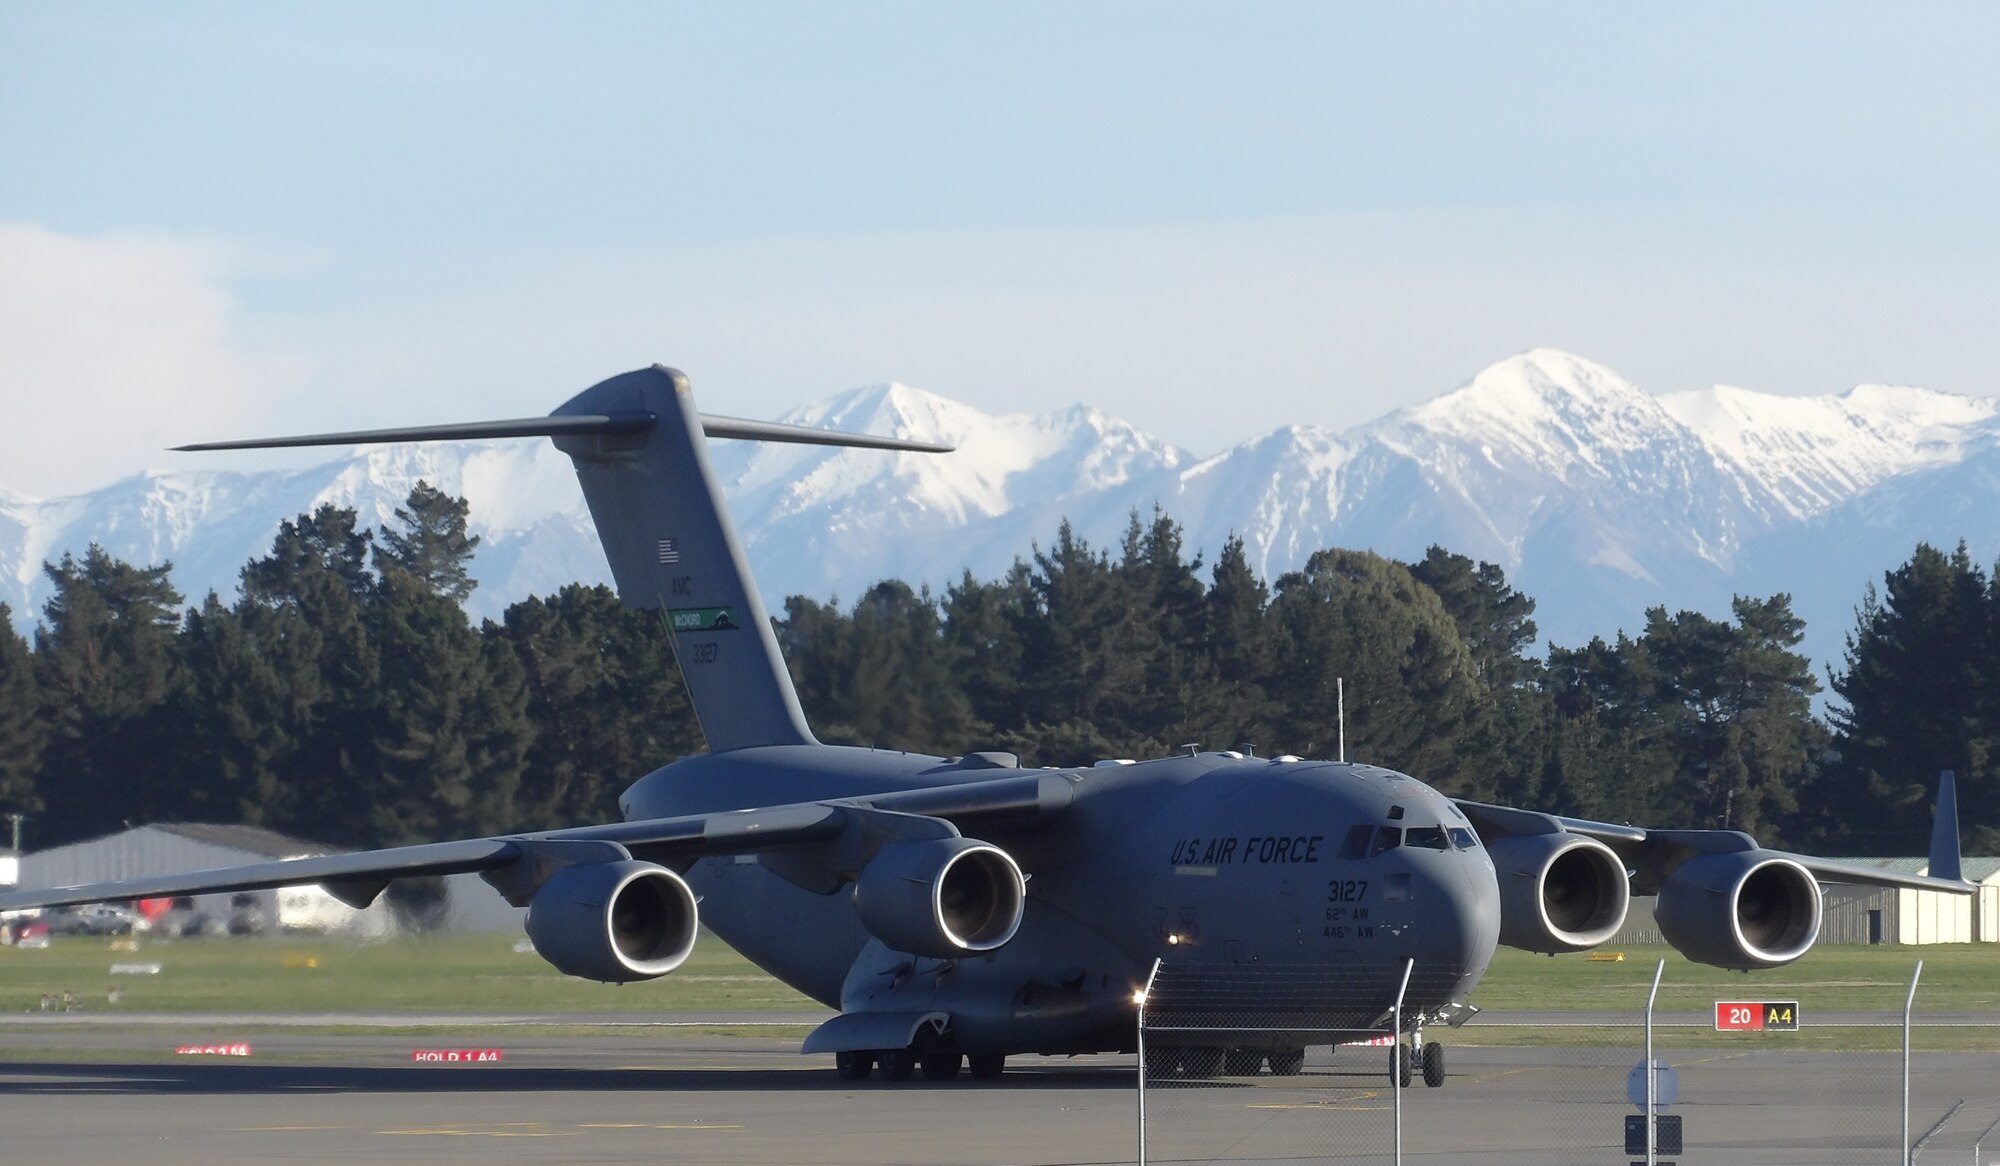 A C-17 Globemaster III from Joint Base Lewis-McChord, Wash., lands at the Christchurch Airport in Christchurch, New Zealand, Aug. 7, 2020. Before conducting the Operation Deep Freeze mission, air crew and personnel from Joint Base Lewis-McChord must go through a 14-day quarantine to mitigate the spread of COVID-19 and maintain Antarctica as the only continent that hasn’t had a case of the virus. (Courtesy photo by Ron Rogers)